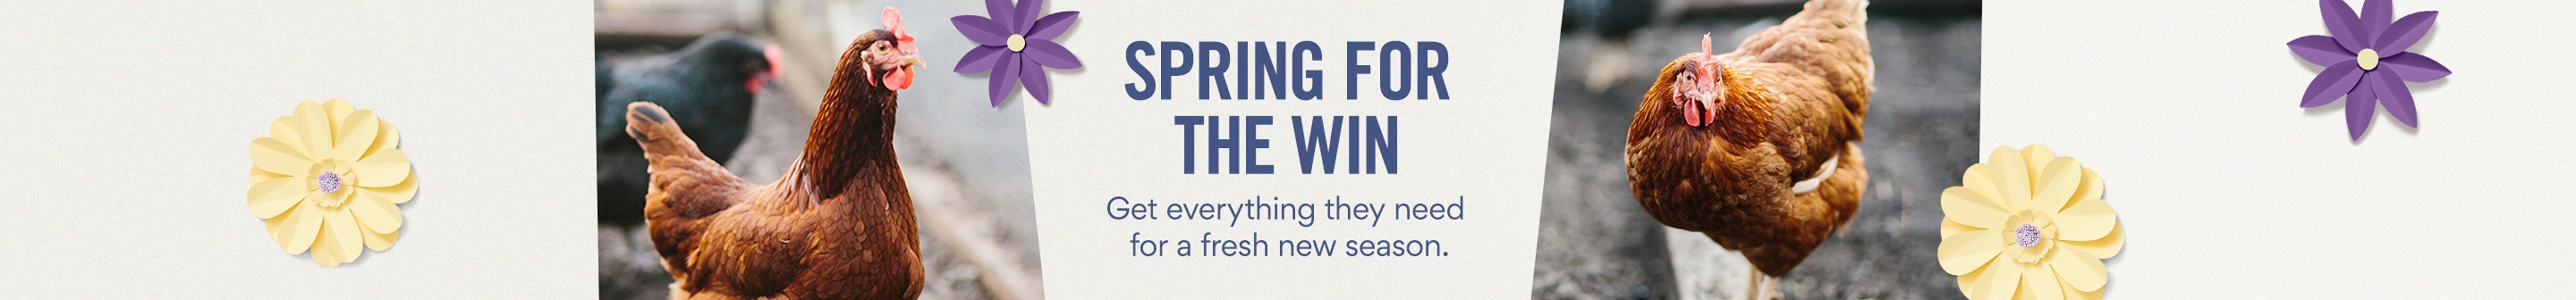 Spring for the win: Get Everything they need for a fresh new season